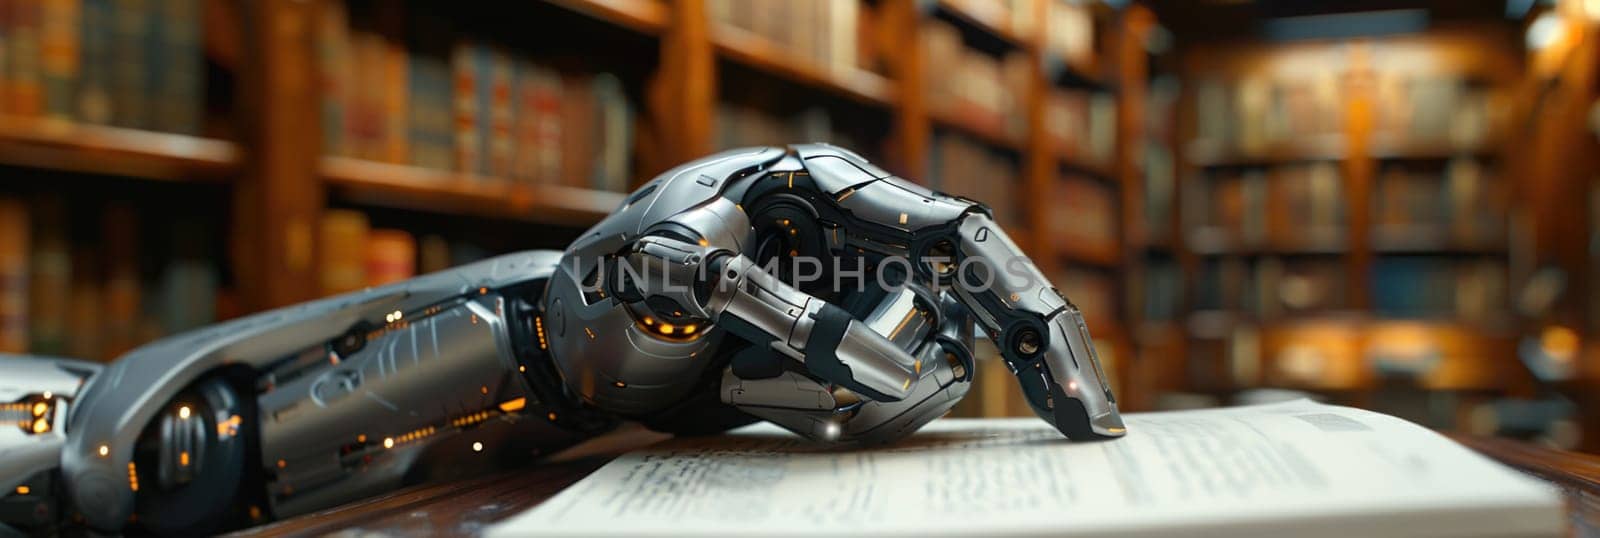 Robotic Hand Touching Book in Library by but_photo